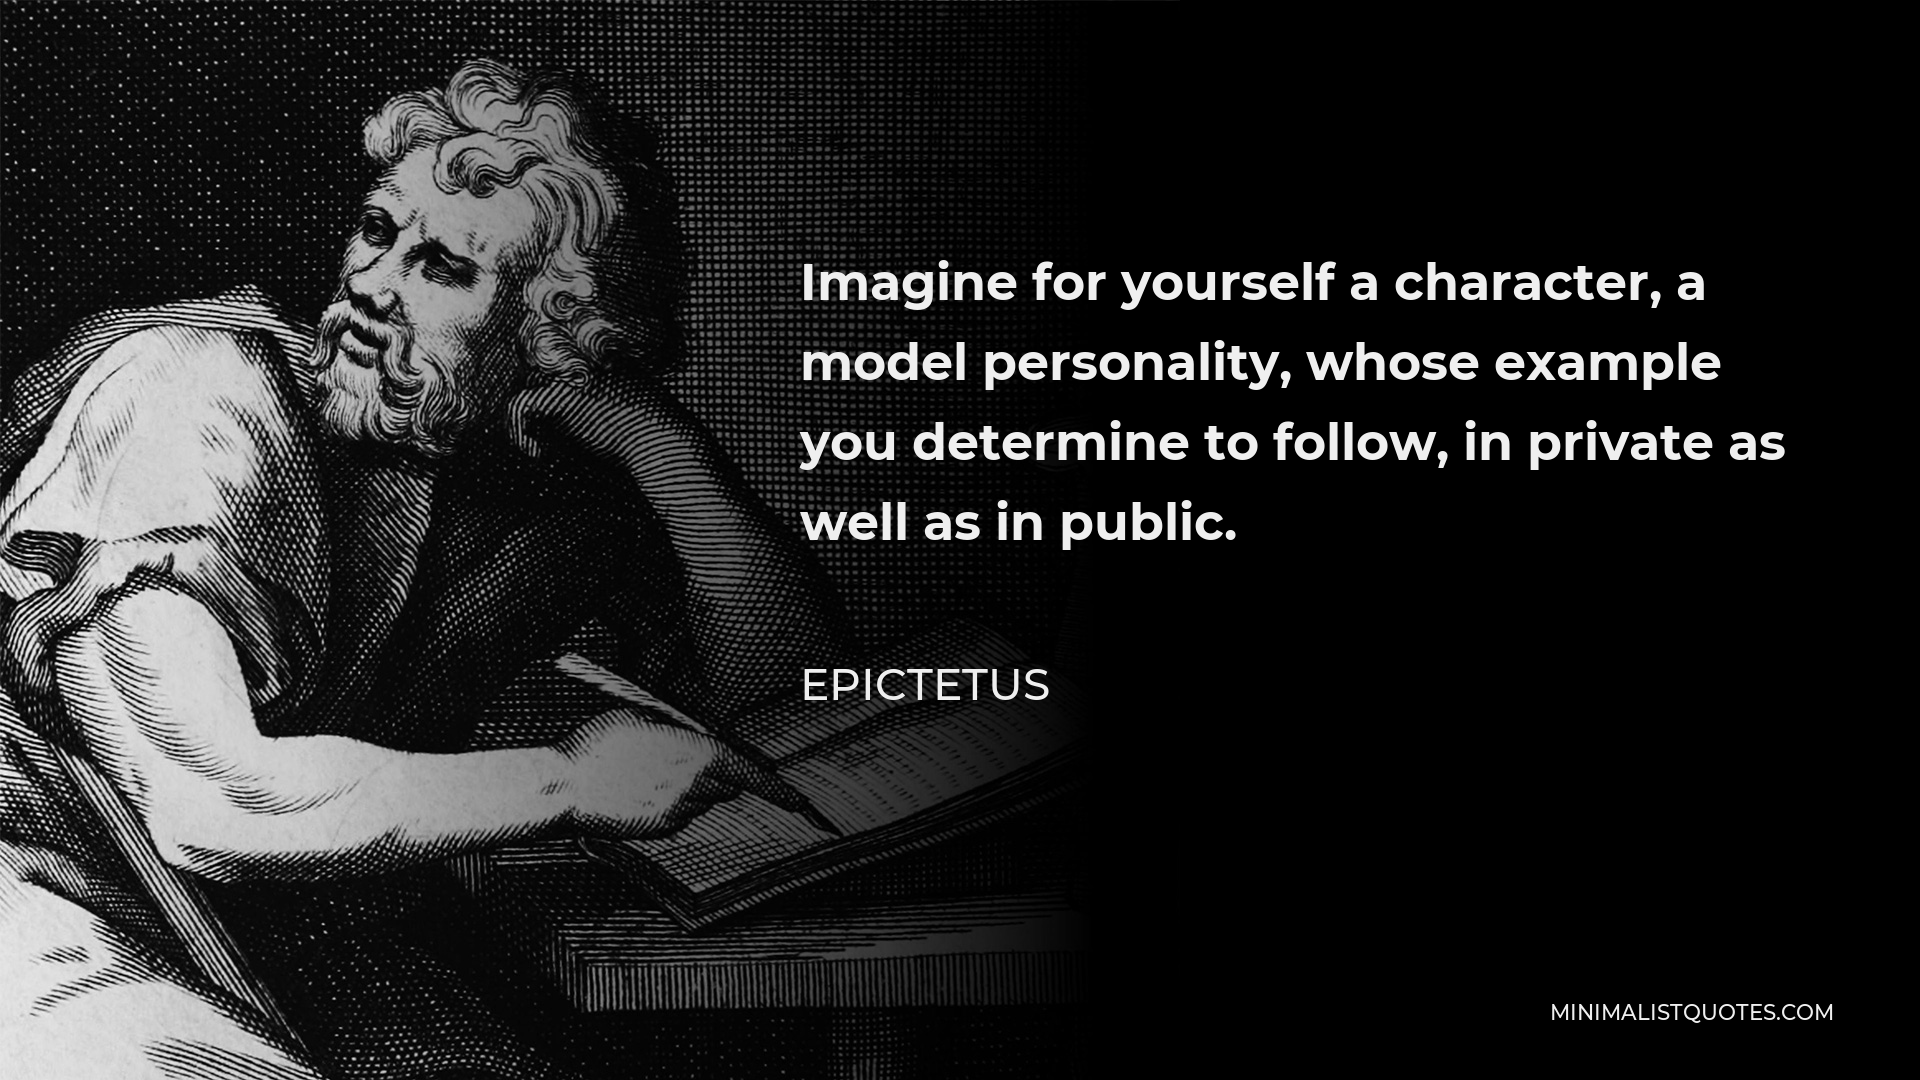 Epictetus Quote - Imagine for yourself a character, a model personality, whose example you determine to follow, in private as well as in public.